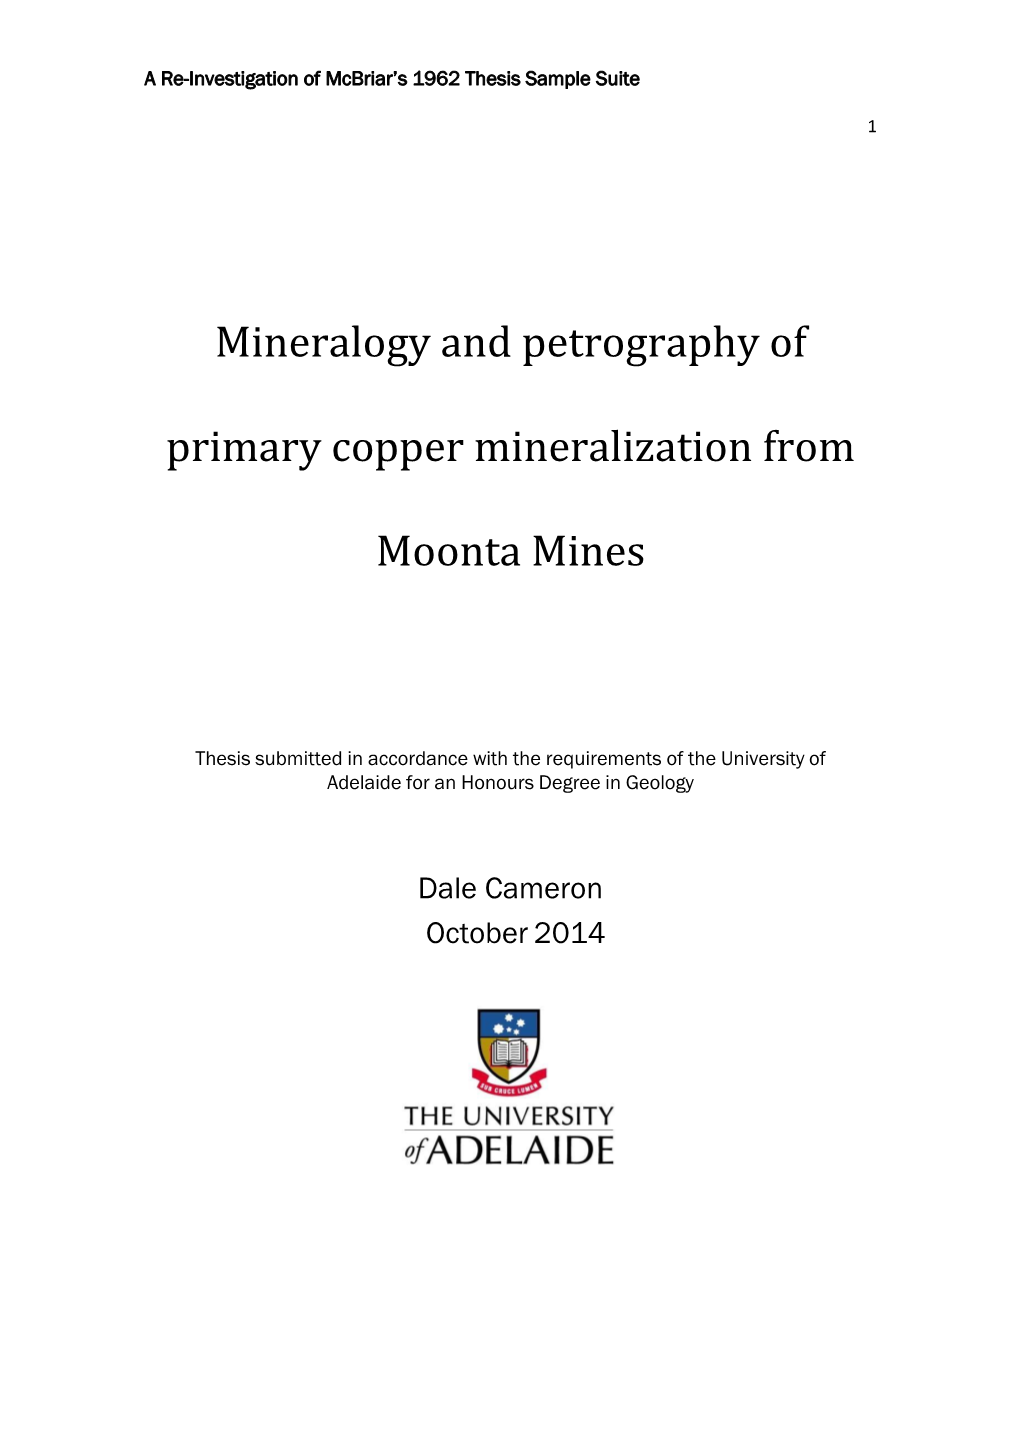 Mineralogy and Petrography of Primary Copper Mineralization from Moonta Mines: a Re-Investigation of Mcbriar’S 1962 Thesis Sample Suite